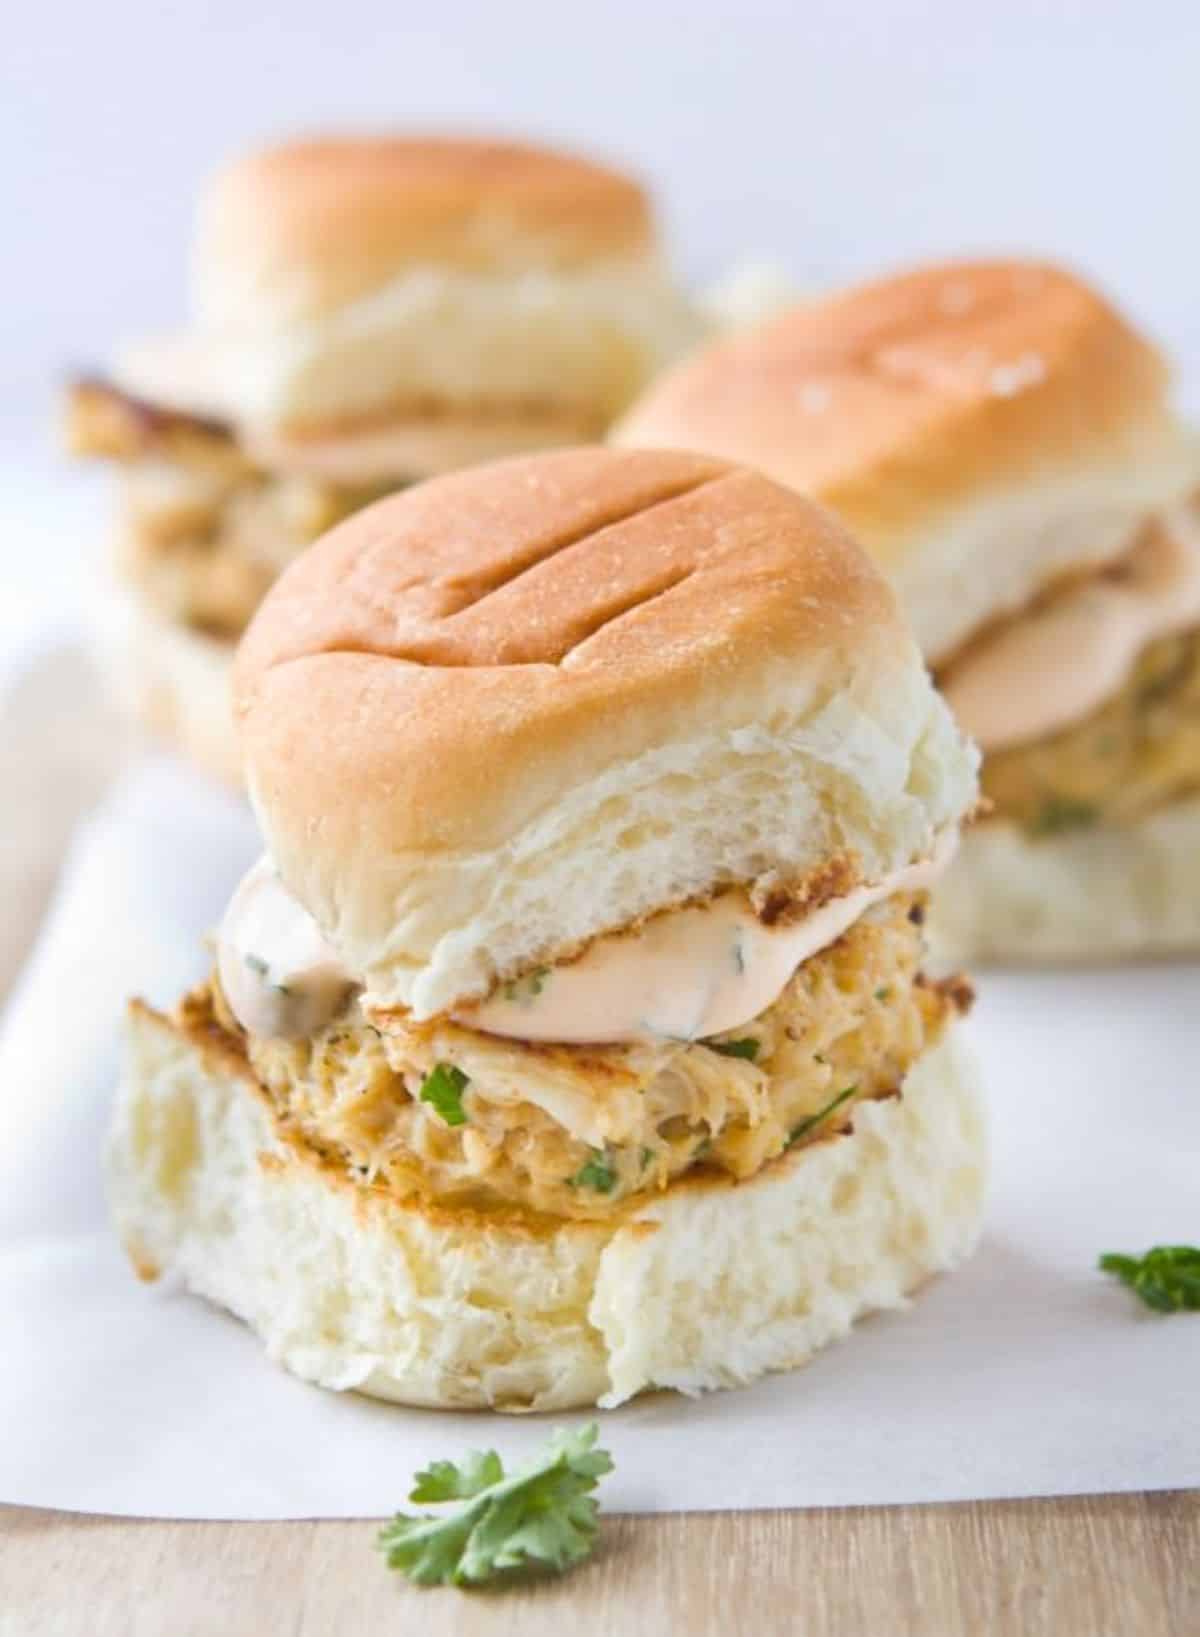 Delicious crab cake sliders on a wooden tray.